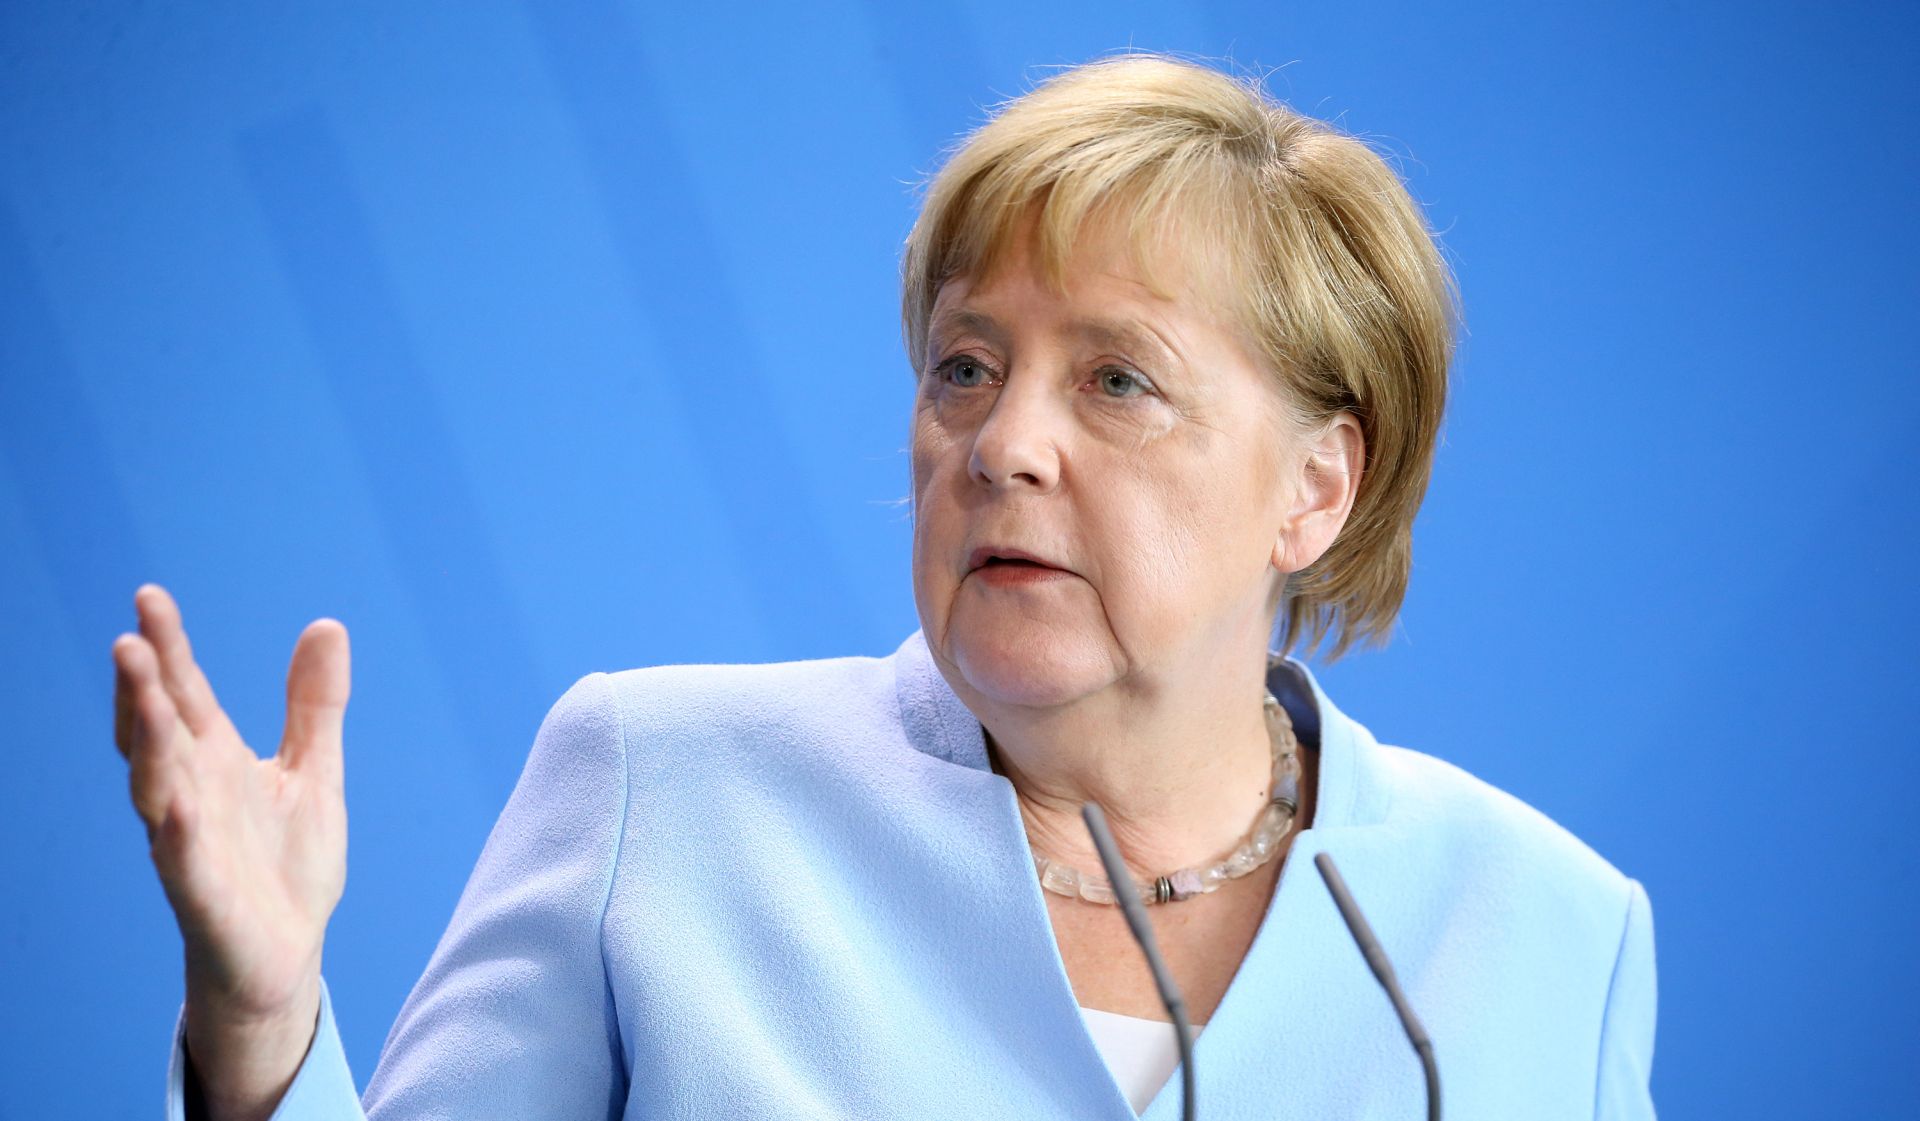 14 August 2019, Berlin: German Chancellor Angela Merkel speaks during a press conference with Gitanas Nauseda (Not Pictured), President of Lithuania, at the Federal Chancellery. Photo: Wolfgang Kumm/dpa